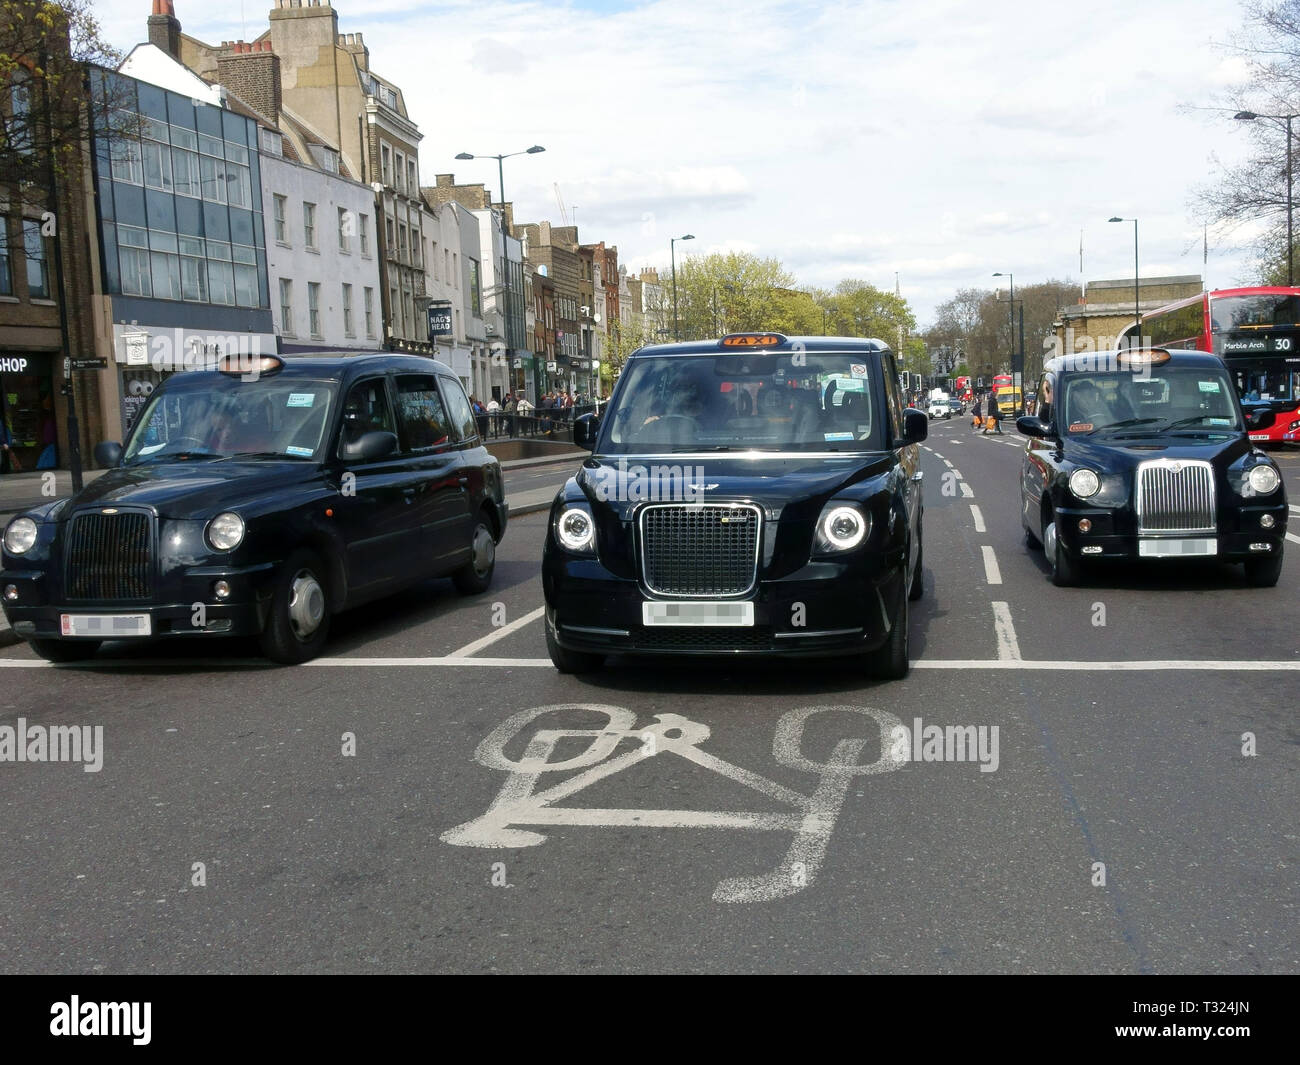 TX electric London taxi by London Electric Vehicle Company (LEVC) flanked by two older diesel taxis Stock Photo